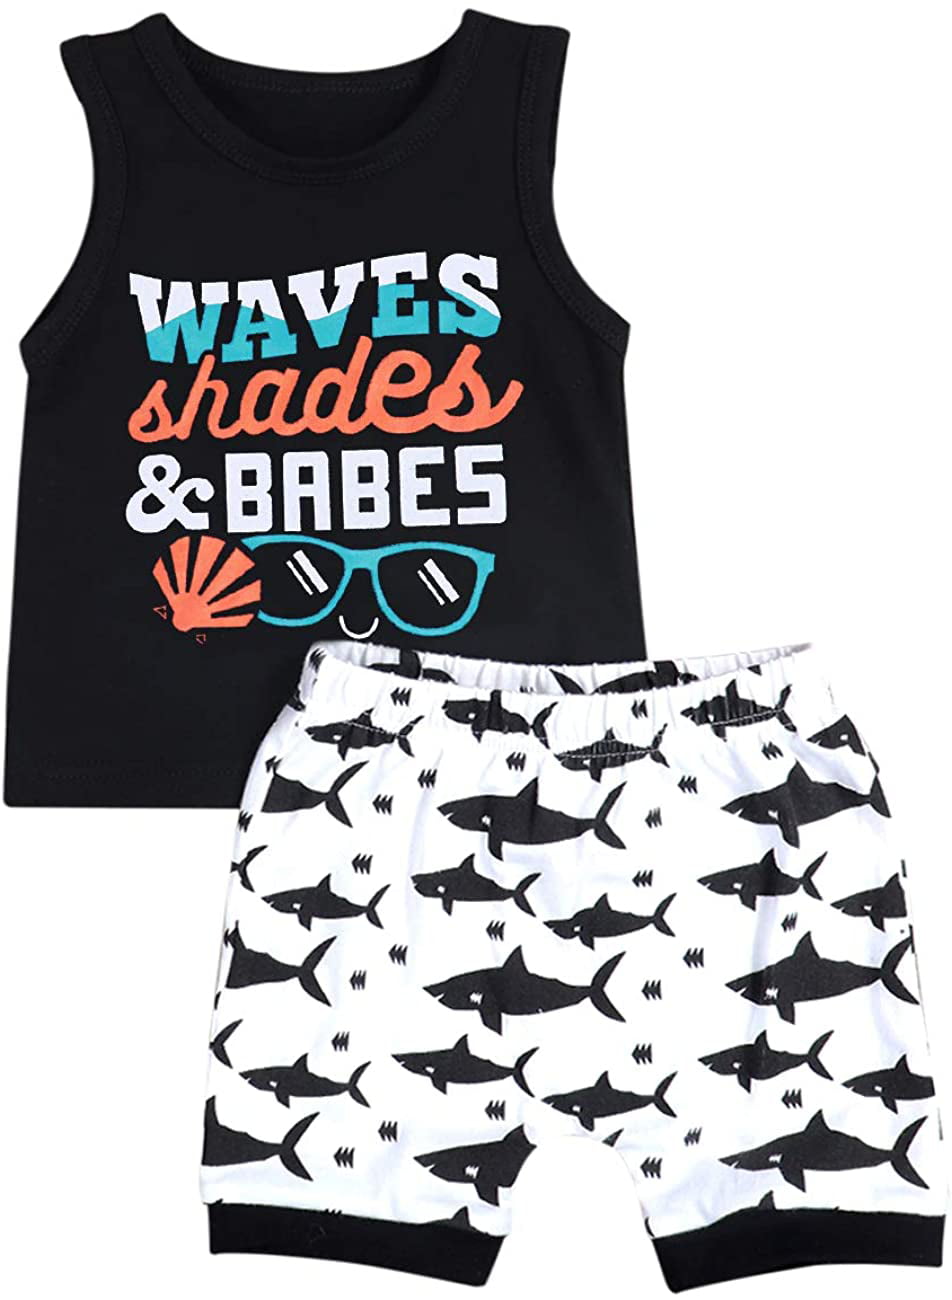 Baby Boy Clothes Waves Shades and Babes Print Summer Black Sleeveless Tops and Wave Short Pants Outfits